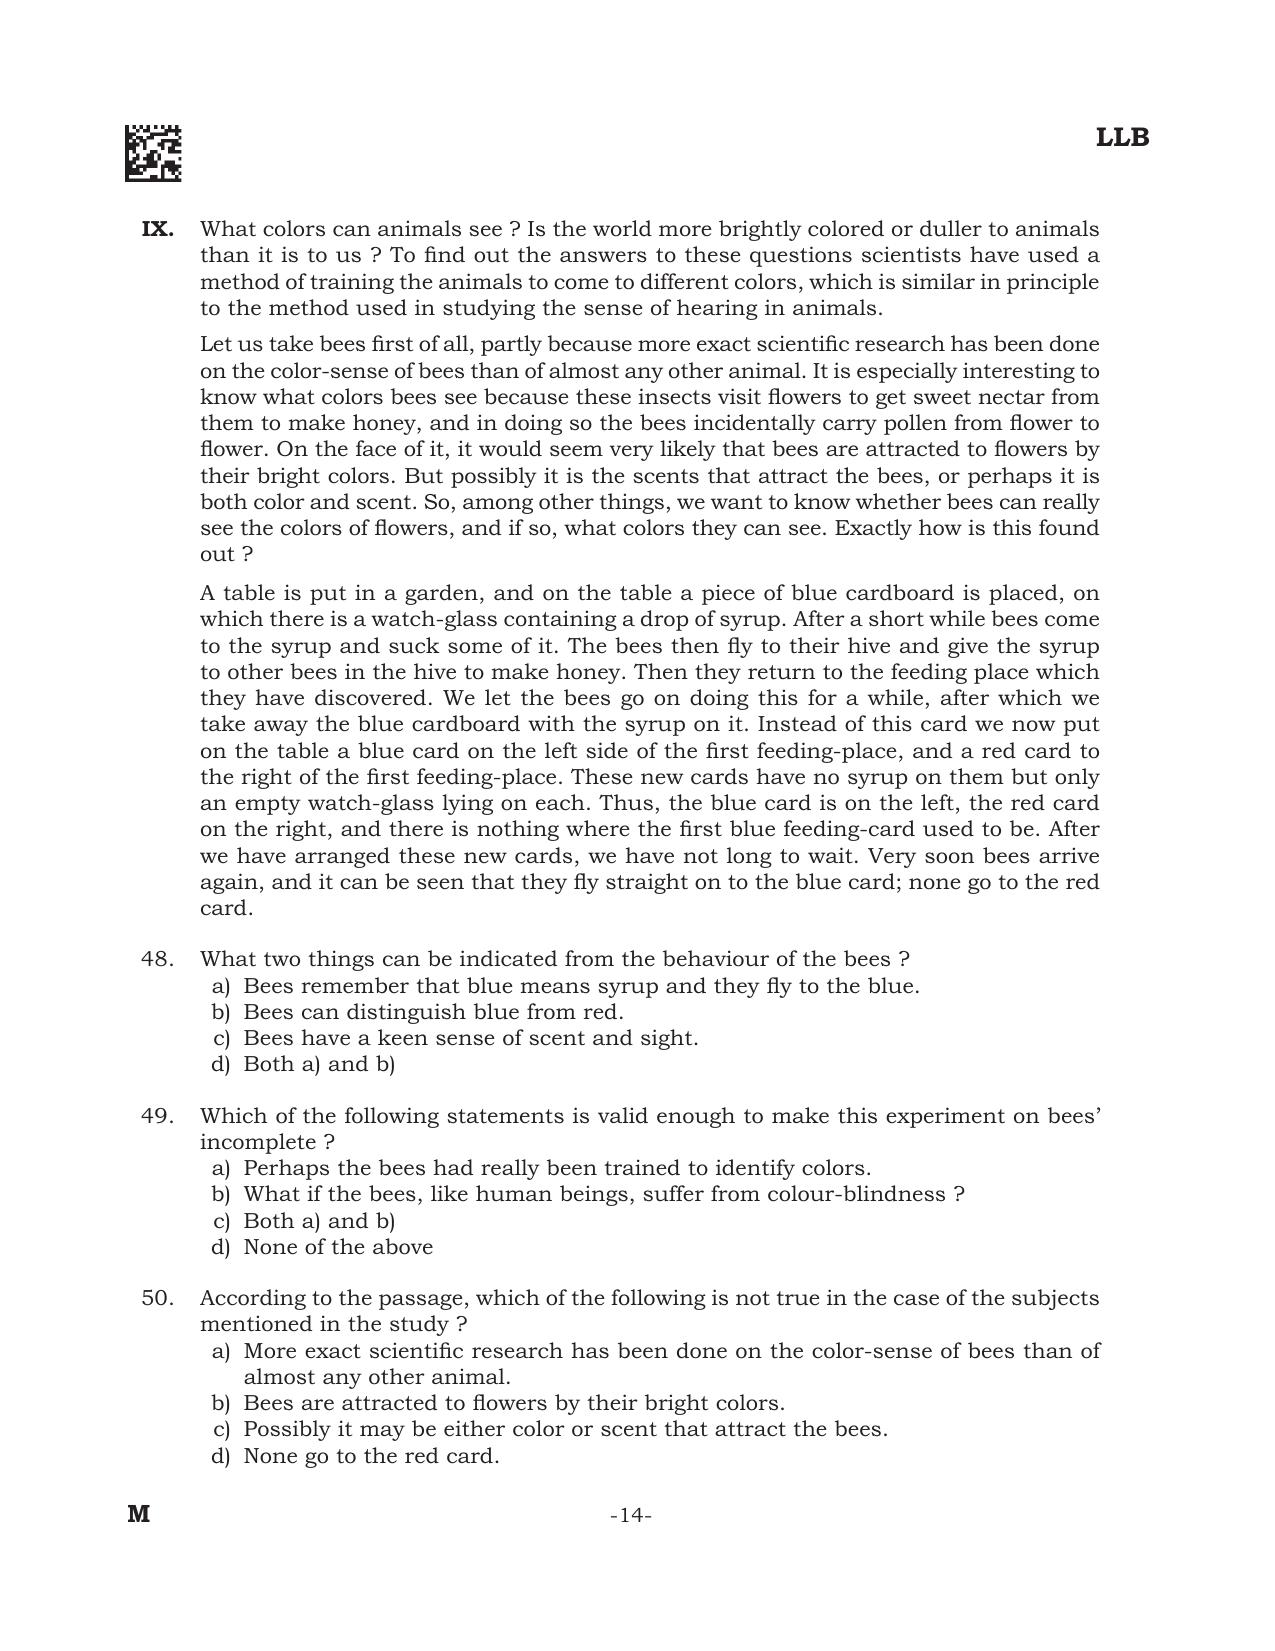 AILET 2022 Question Paper for BA LLB - Page 14